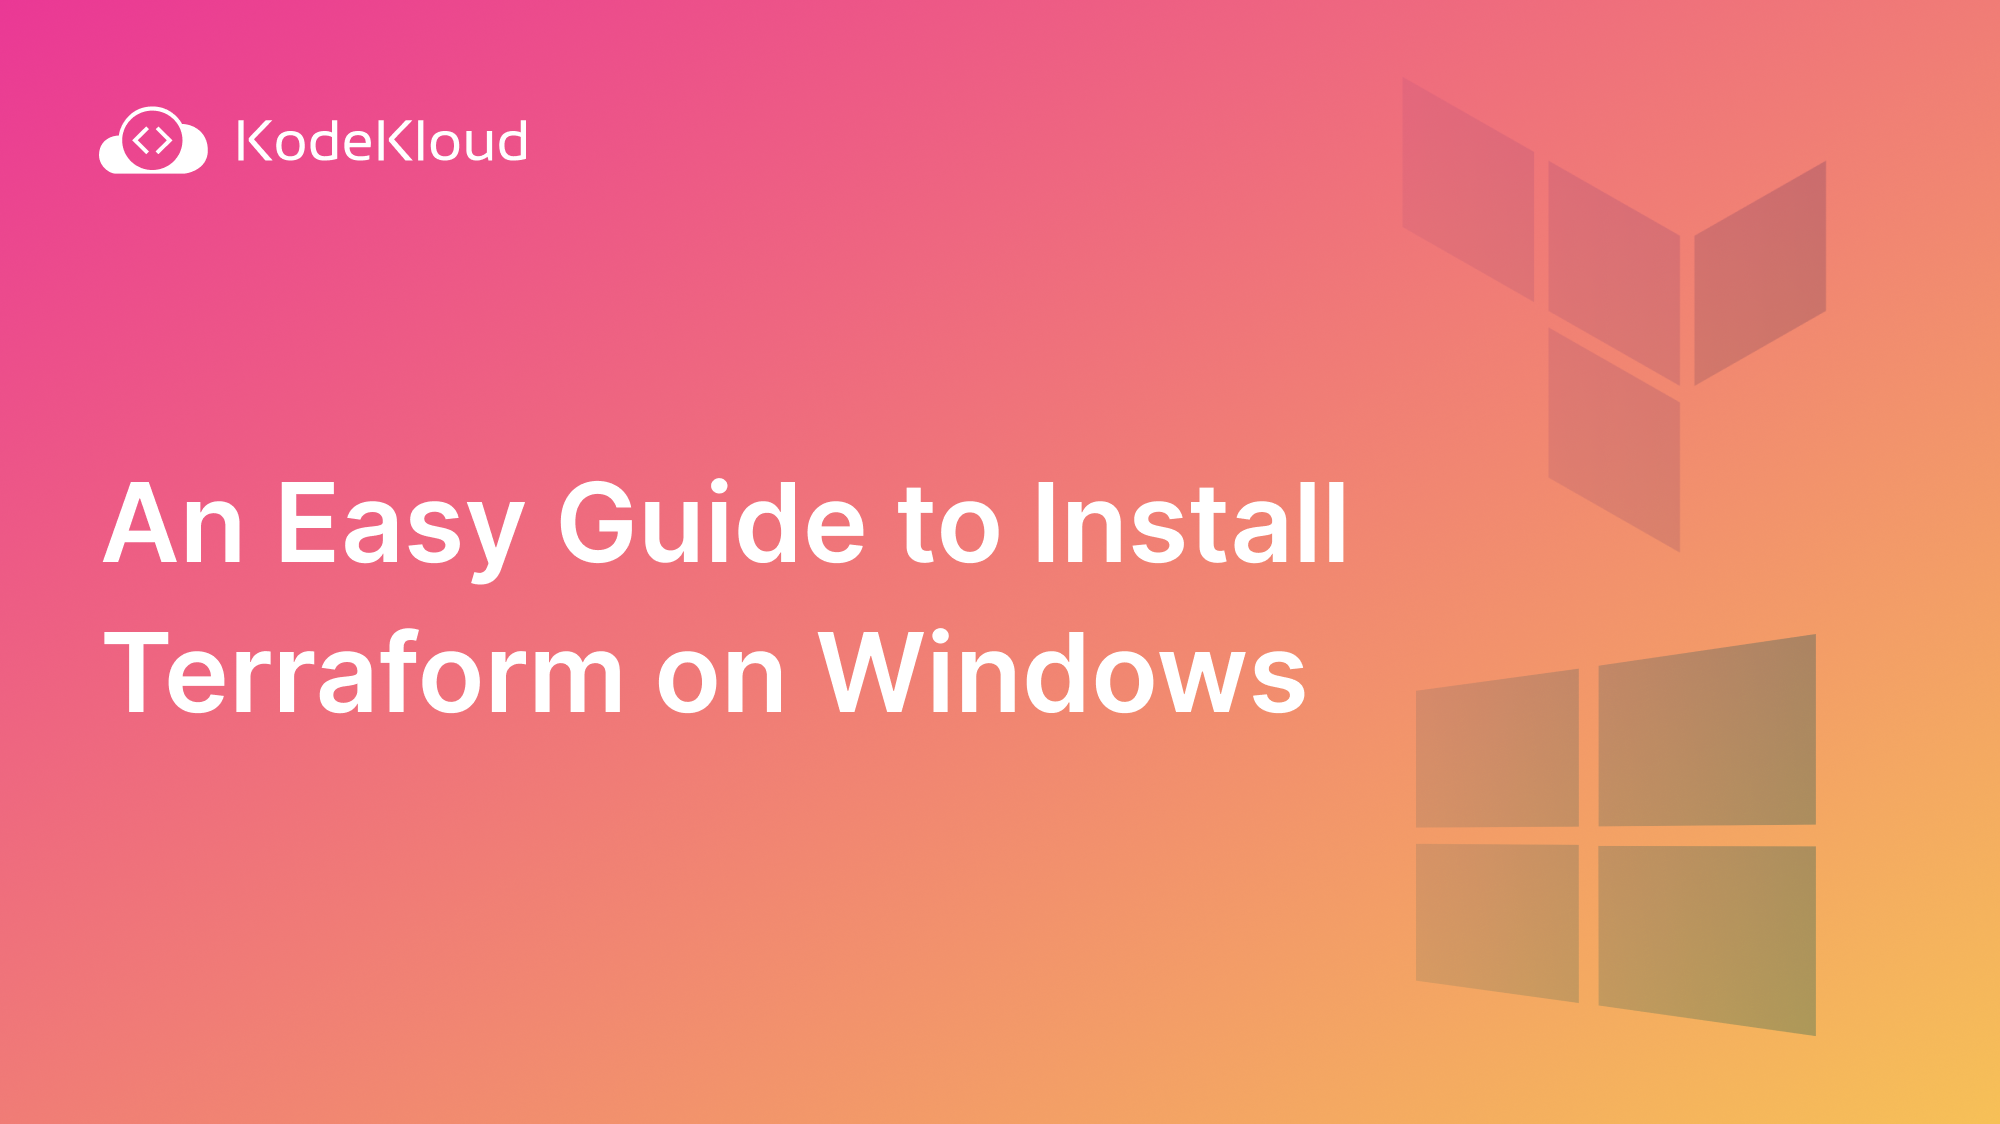 An Easy Guide to Install Terraform on Windows